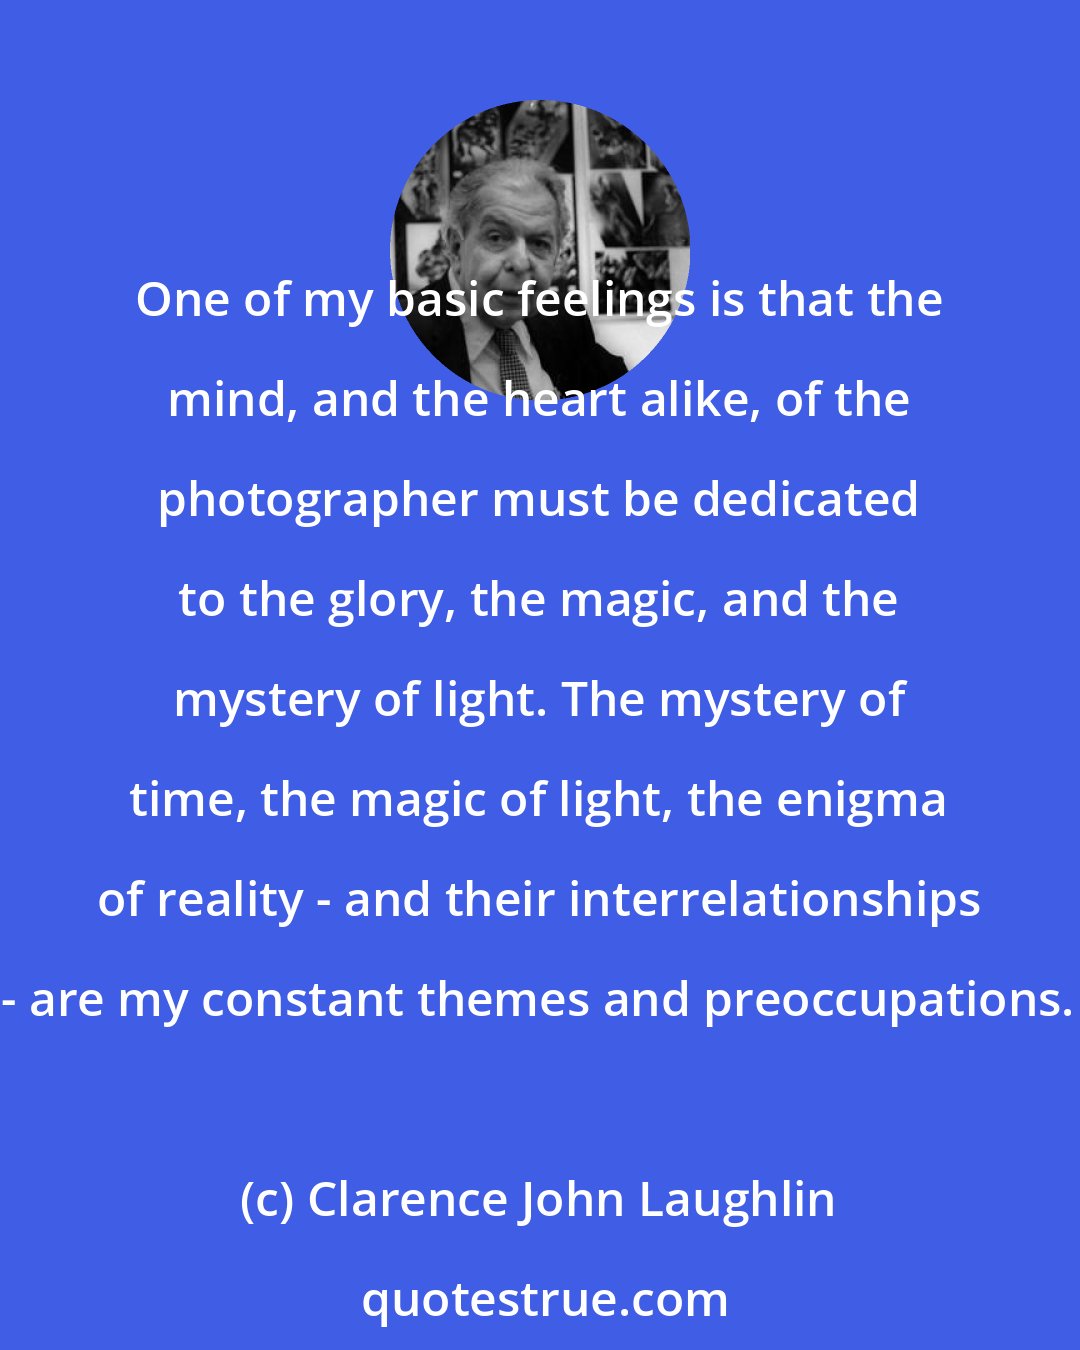 Clarence John Laughlin: One of my basic feelings is that the mind, and the heart alike, of the photographer must be dedicated to the glory, the magic, and the mystery of light. The mystery of time, the magic of light, the enigma of reality - and their interrelationships - are my constant themes and preoccupations.